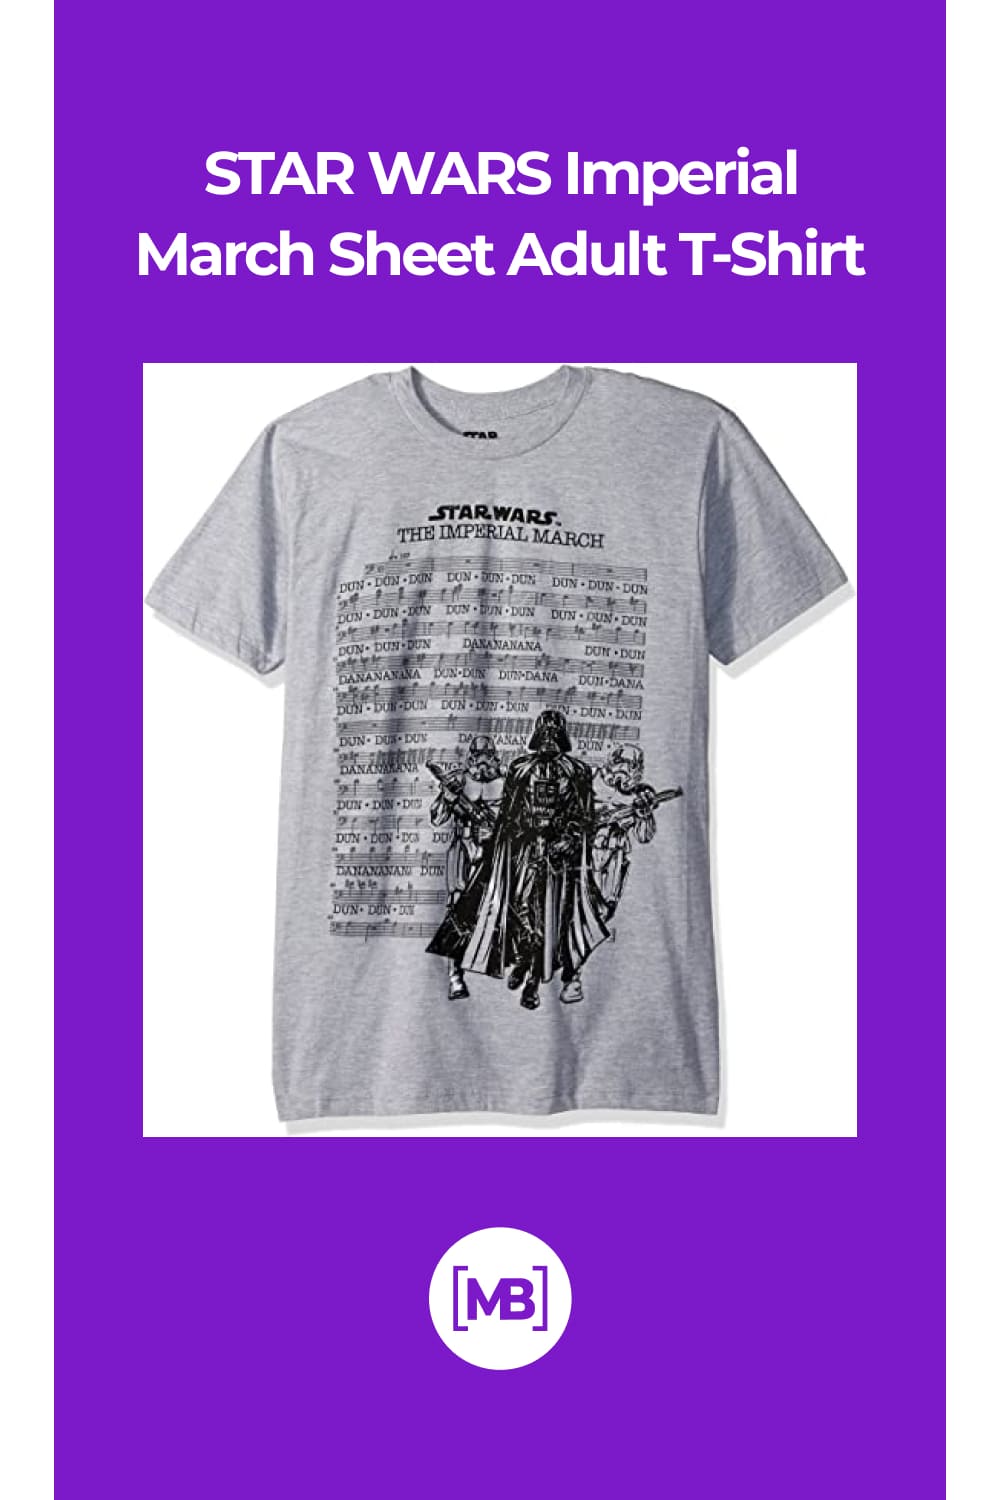 STAR WARS Imperial March Sheet Adult T-Shirt.